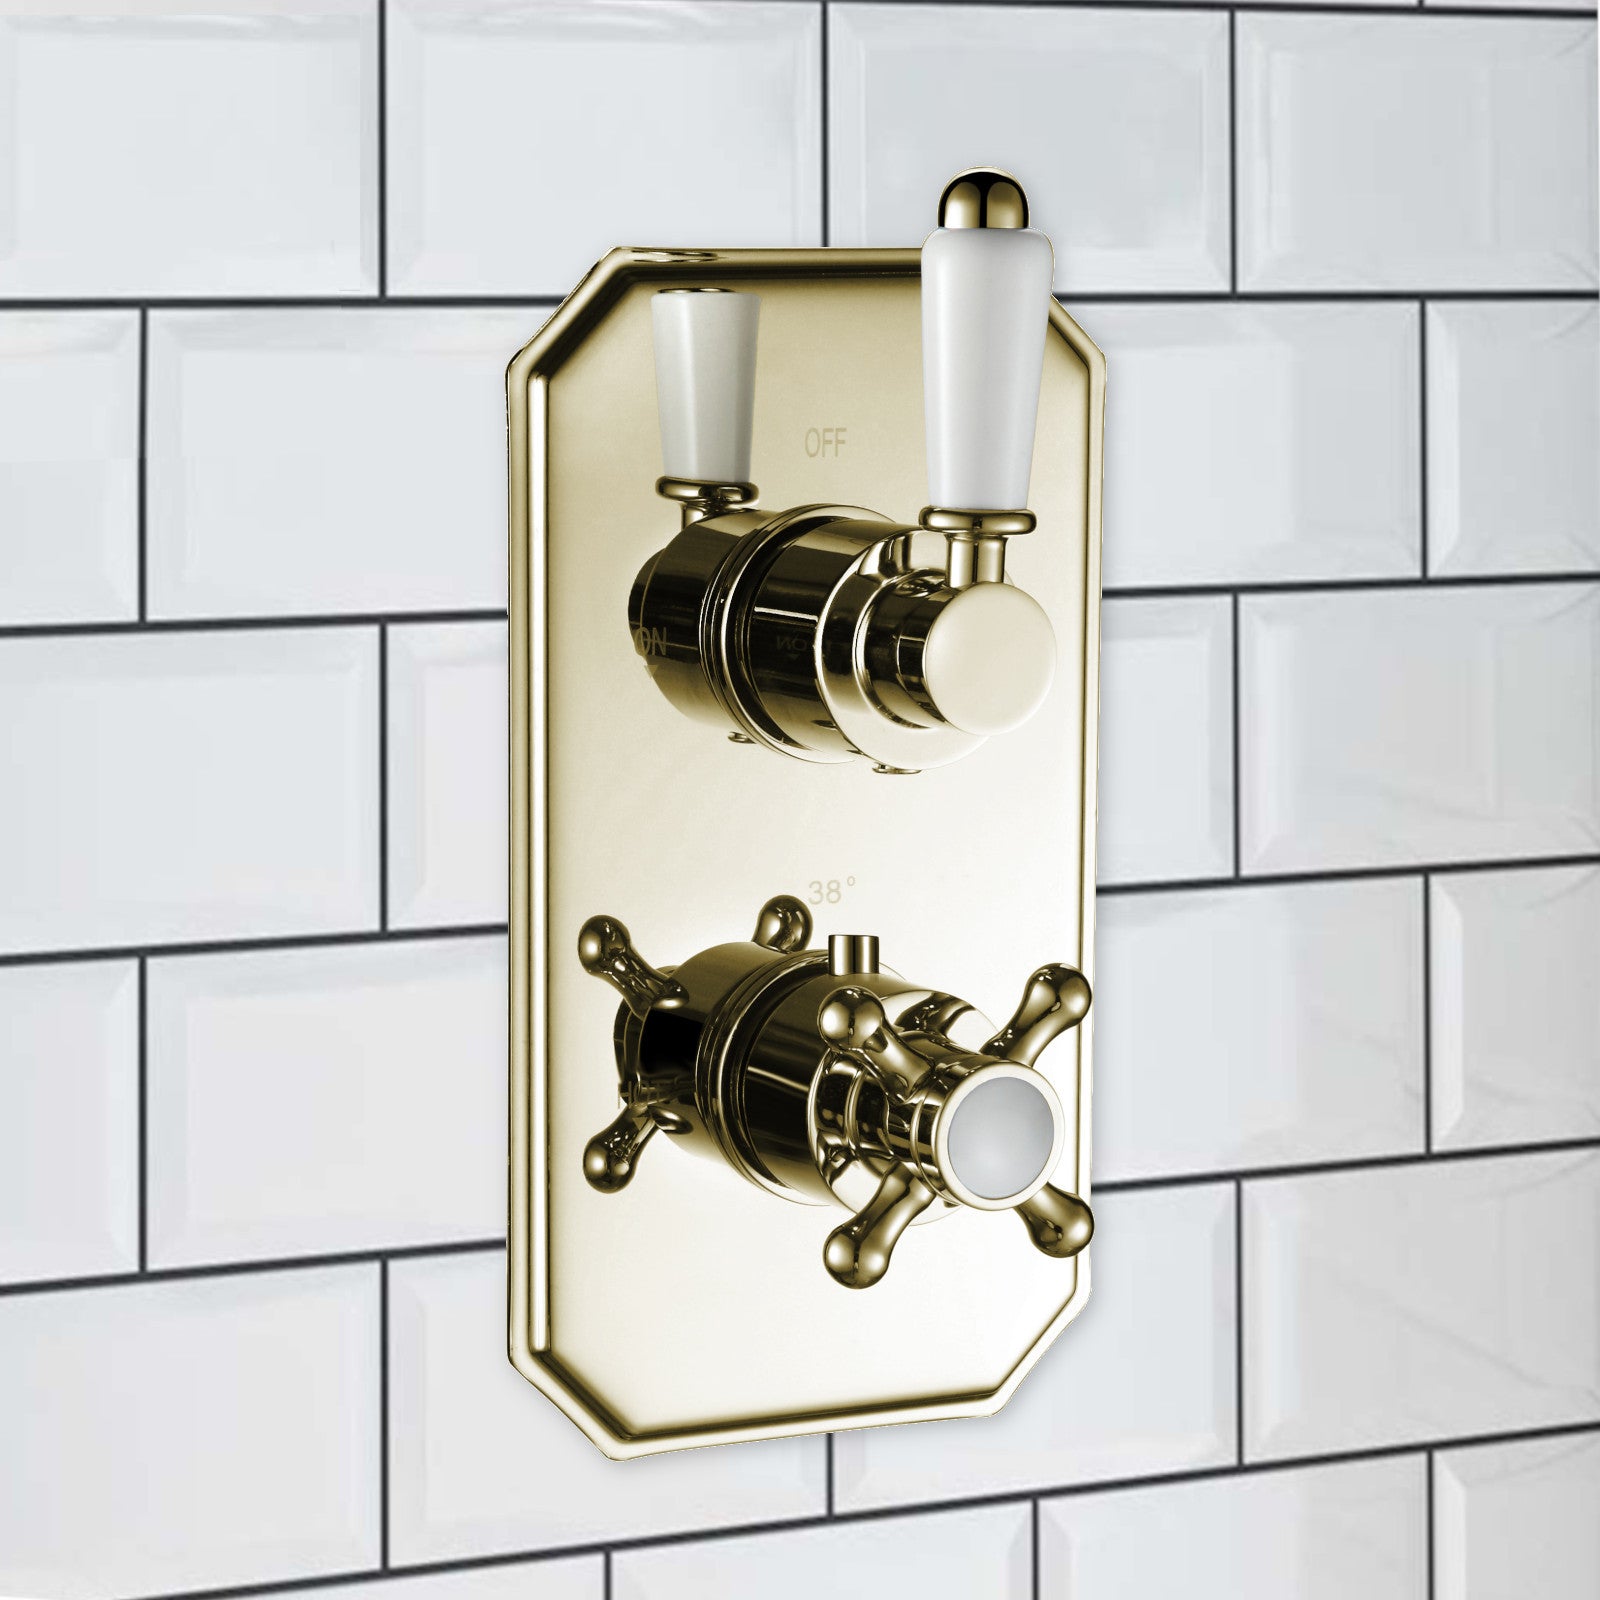 Regent traditional crosshead and white lever concealed thermostatic twin shower valve with 2 outlets - English gold - Showers